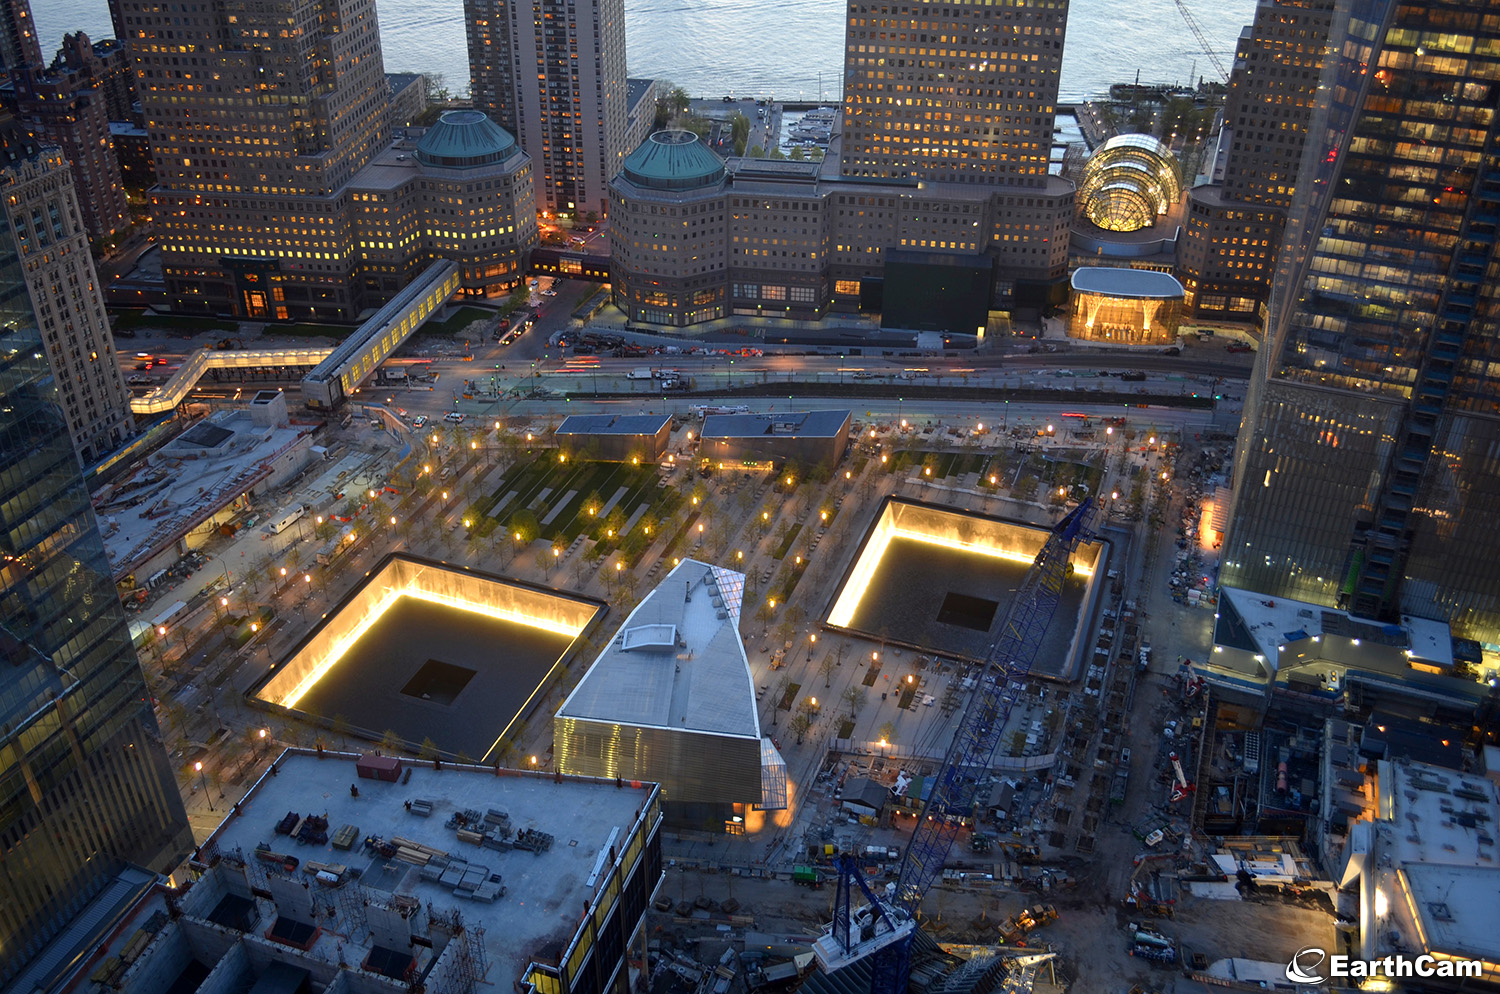 EarthCam construction cameras document the 9/11 Memorial Museum day and night.